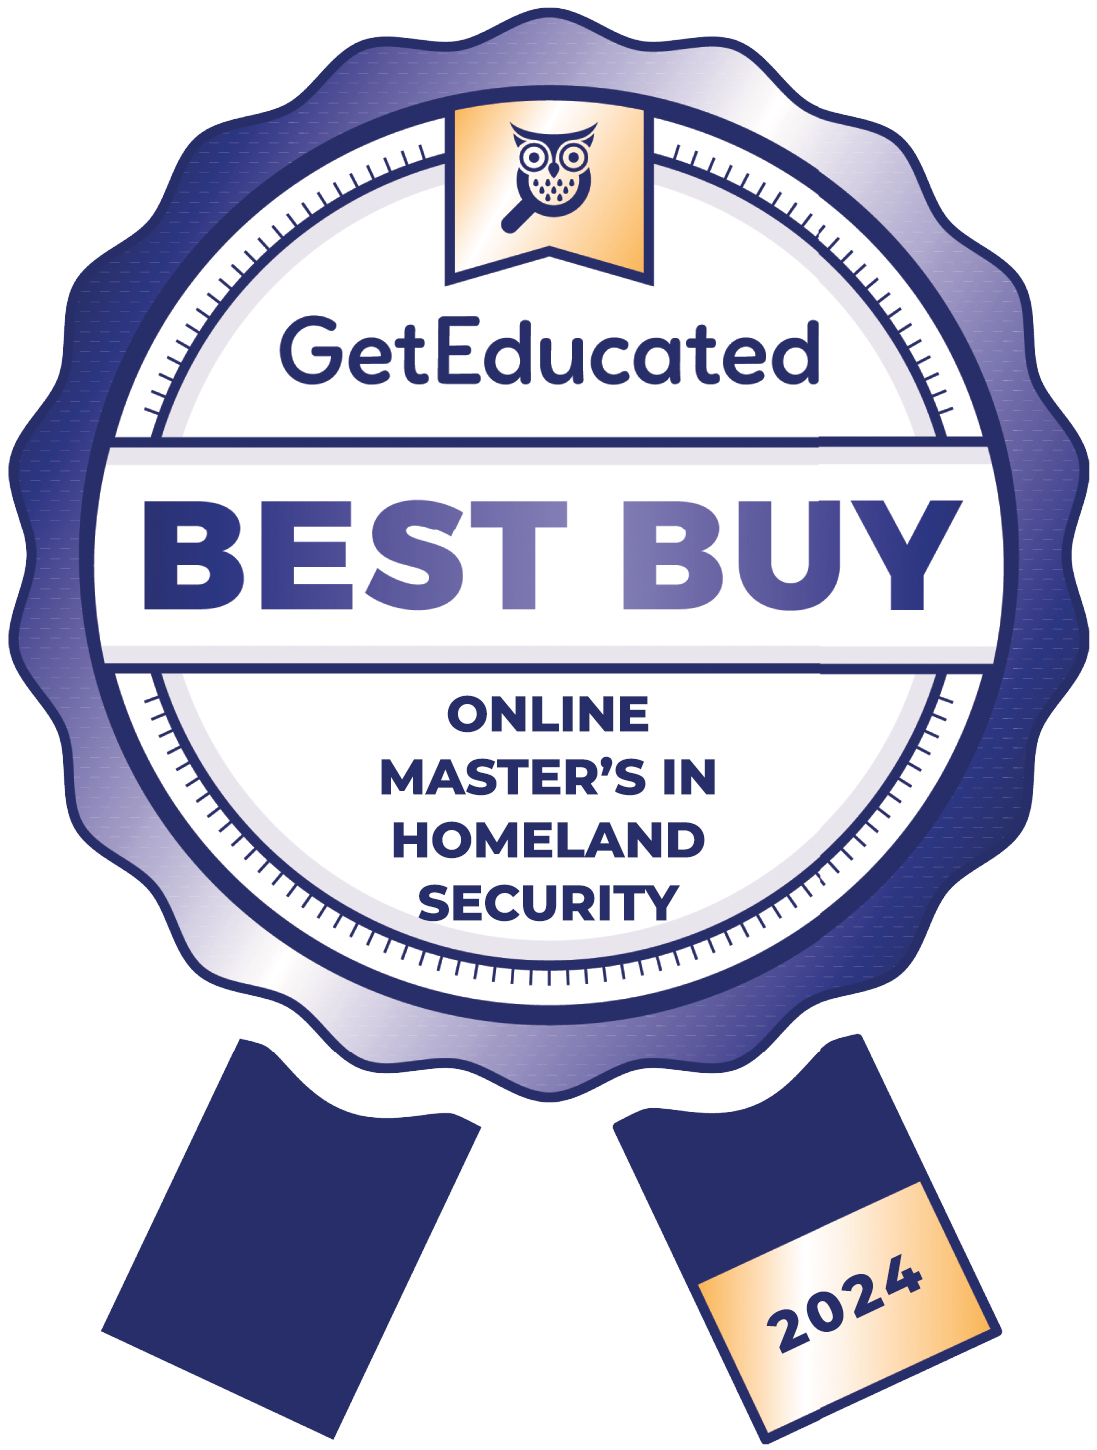 Rankings of the cheapest online master's in homeland security